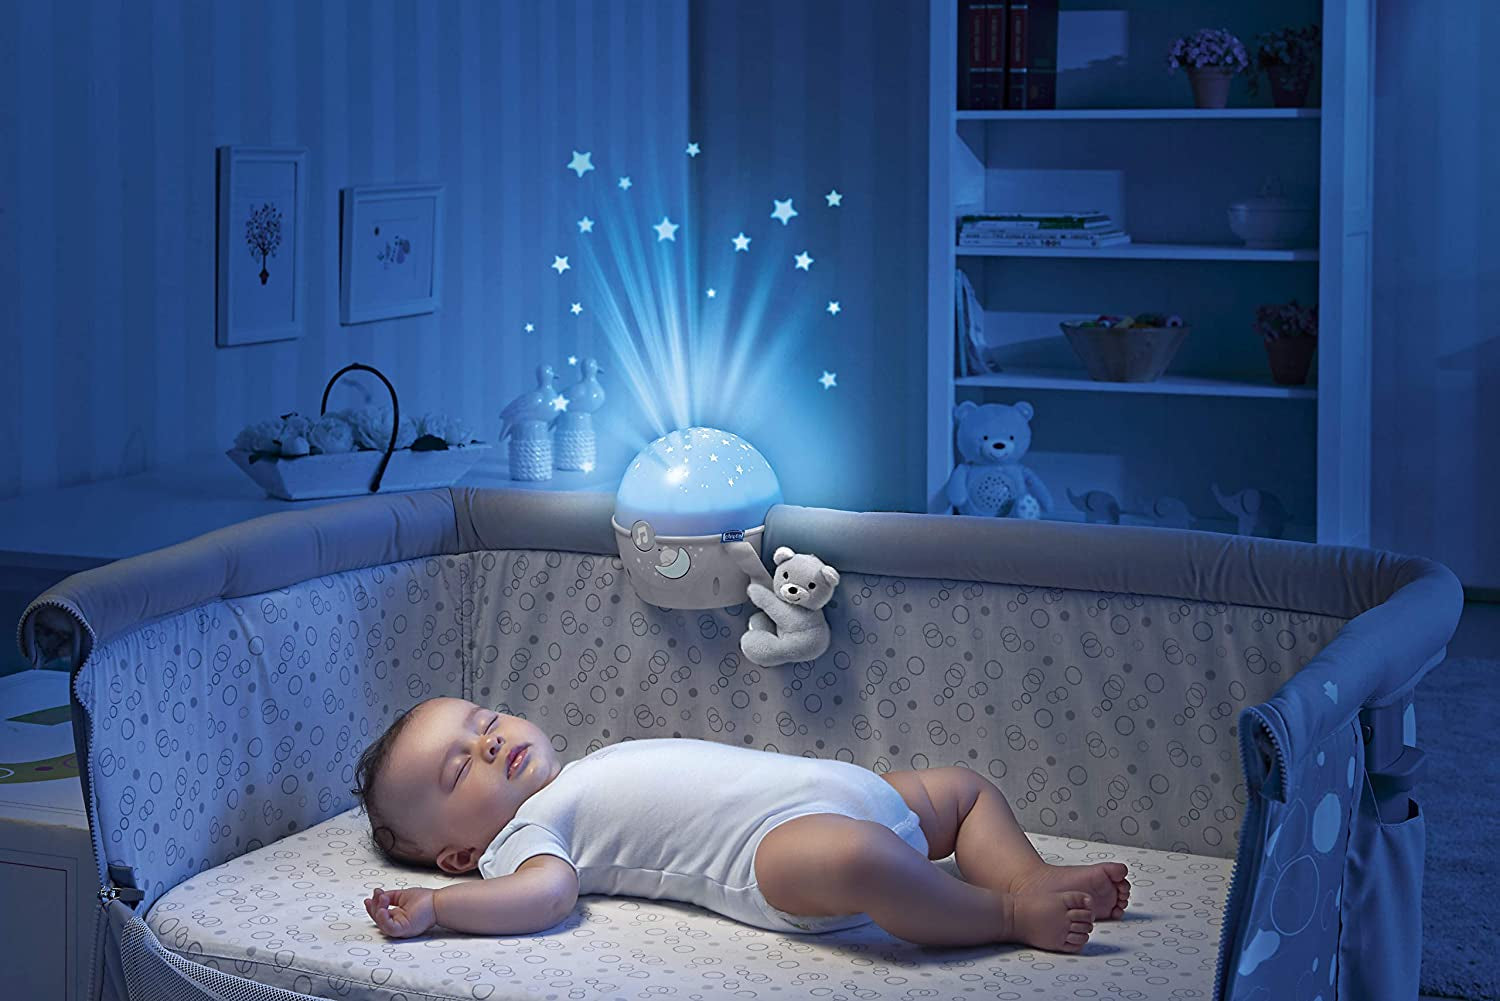 Chicco Next2Stars Baby Night Light with Plush Toy - Star Light Projector for Cots and Cribs, with Sound Sensor, 3 Light Effects and Music - 0+ Months, Beige